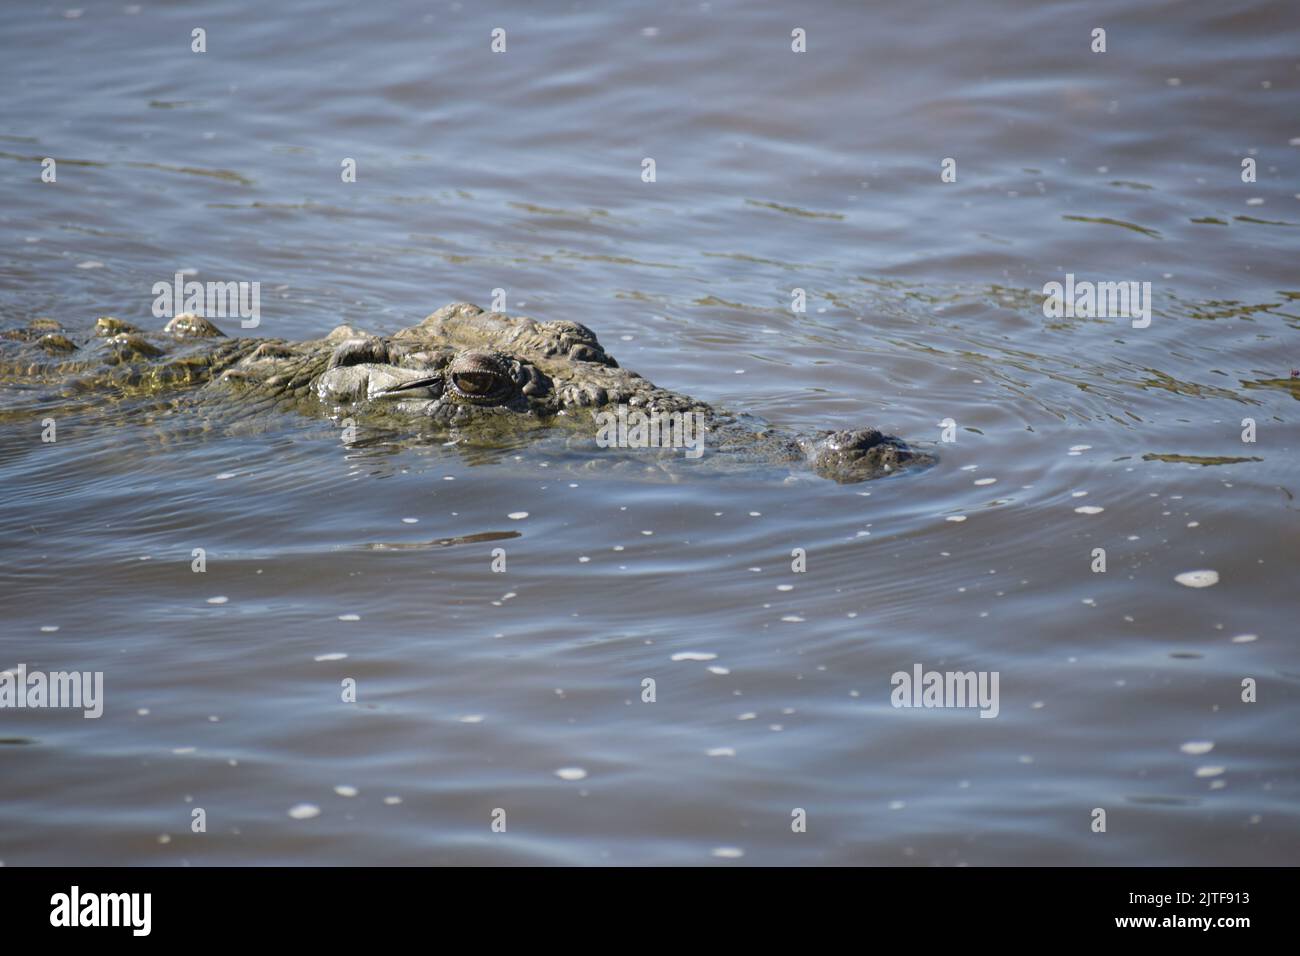 Crocodile ripple as bulging-eyed monster lurks in the dam, the texture of skin clearly visible. Stock Photo